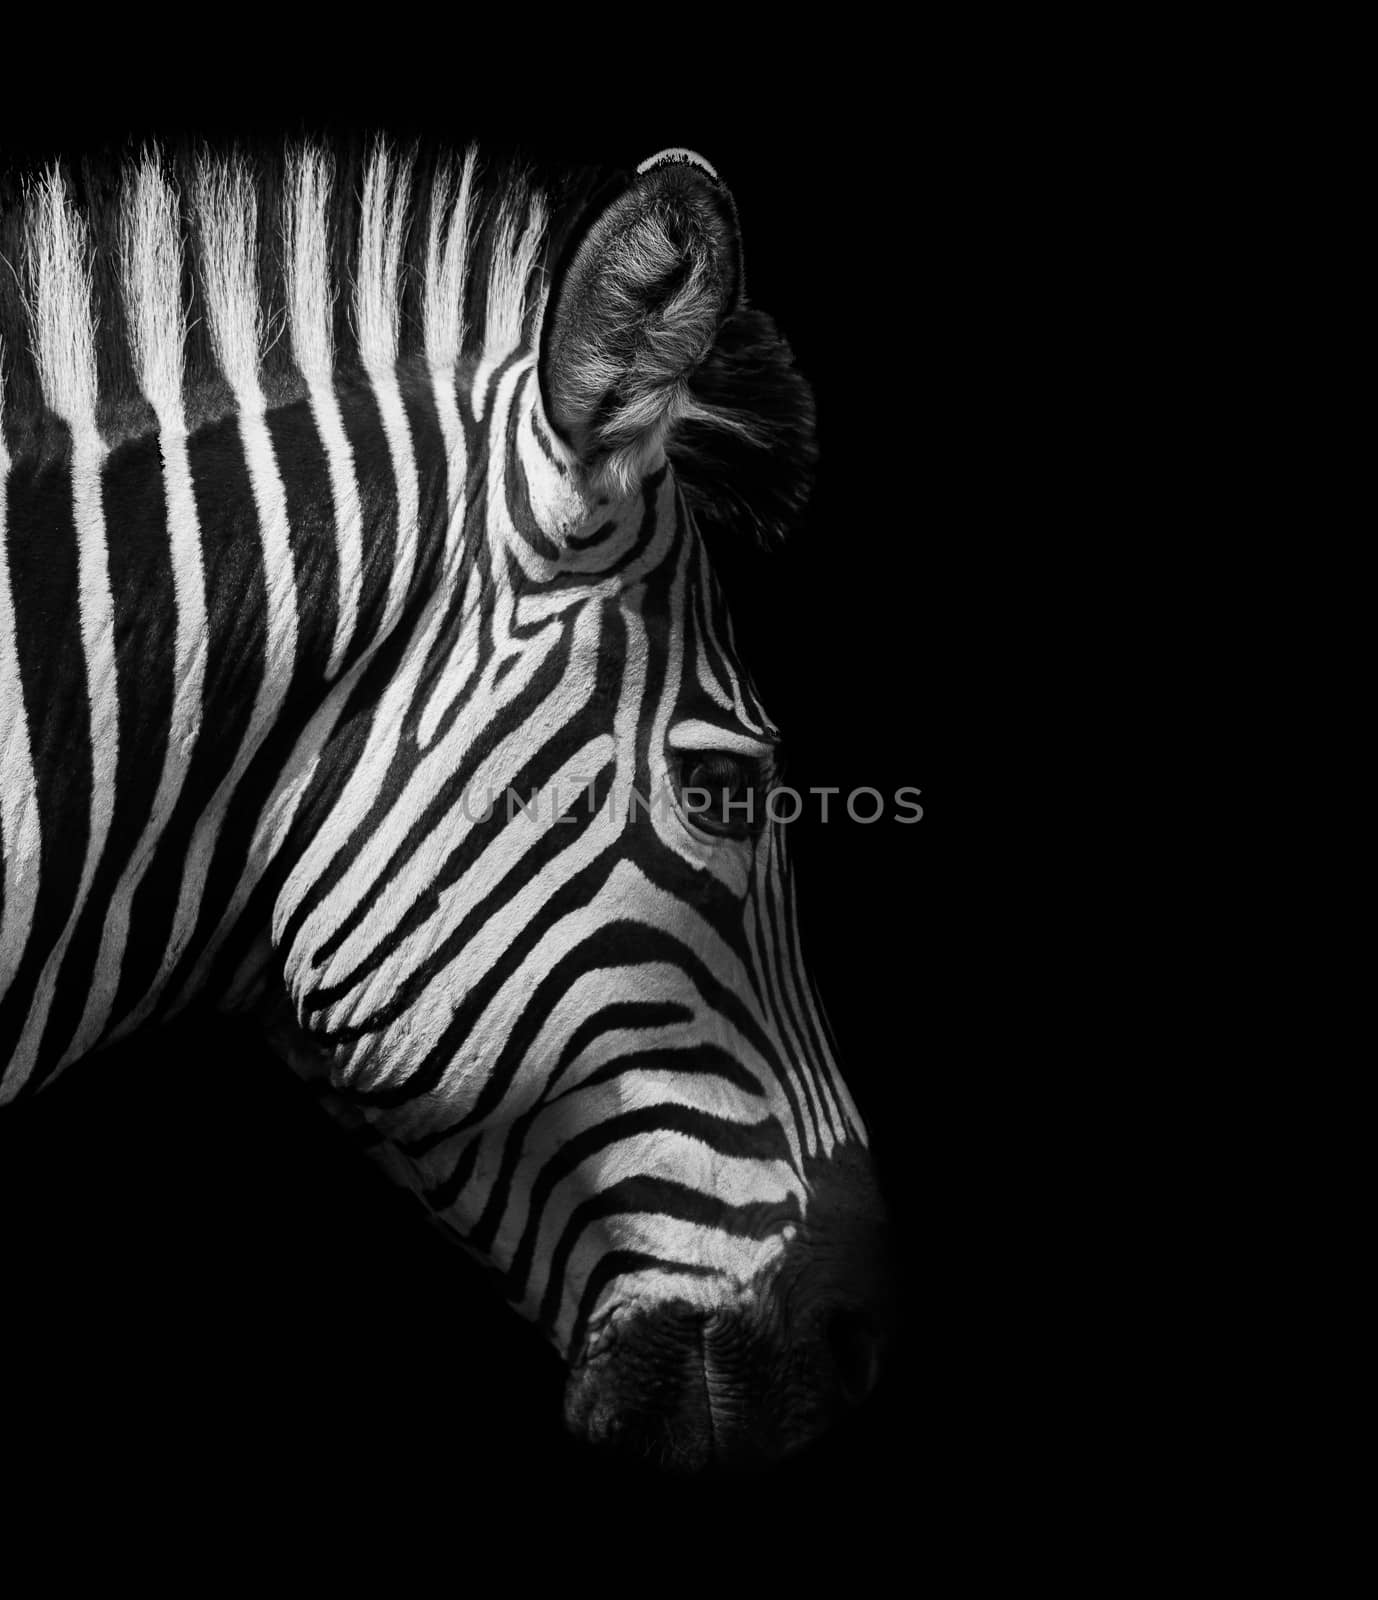 Zebra head from the side in black and white